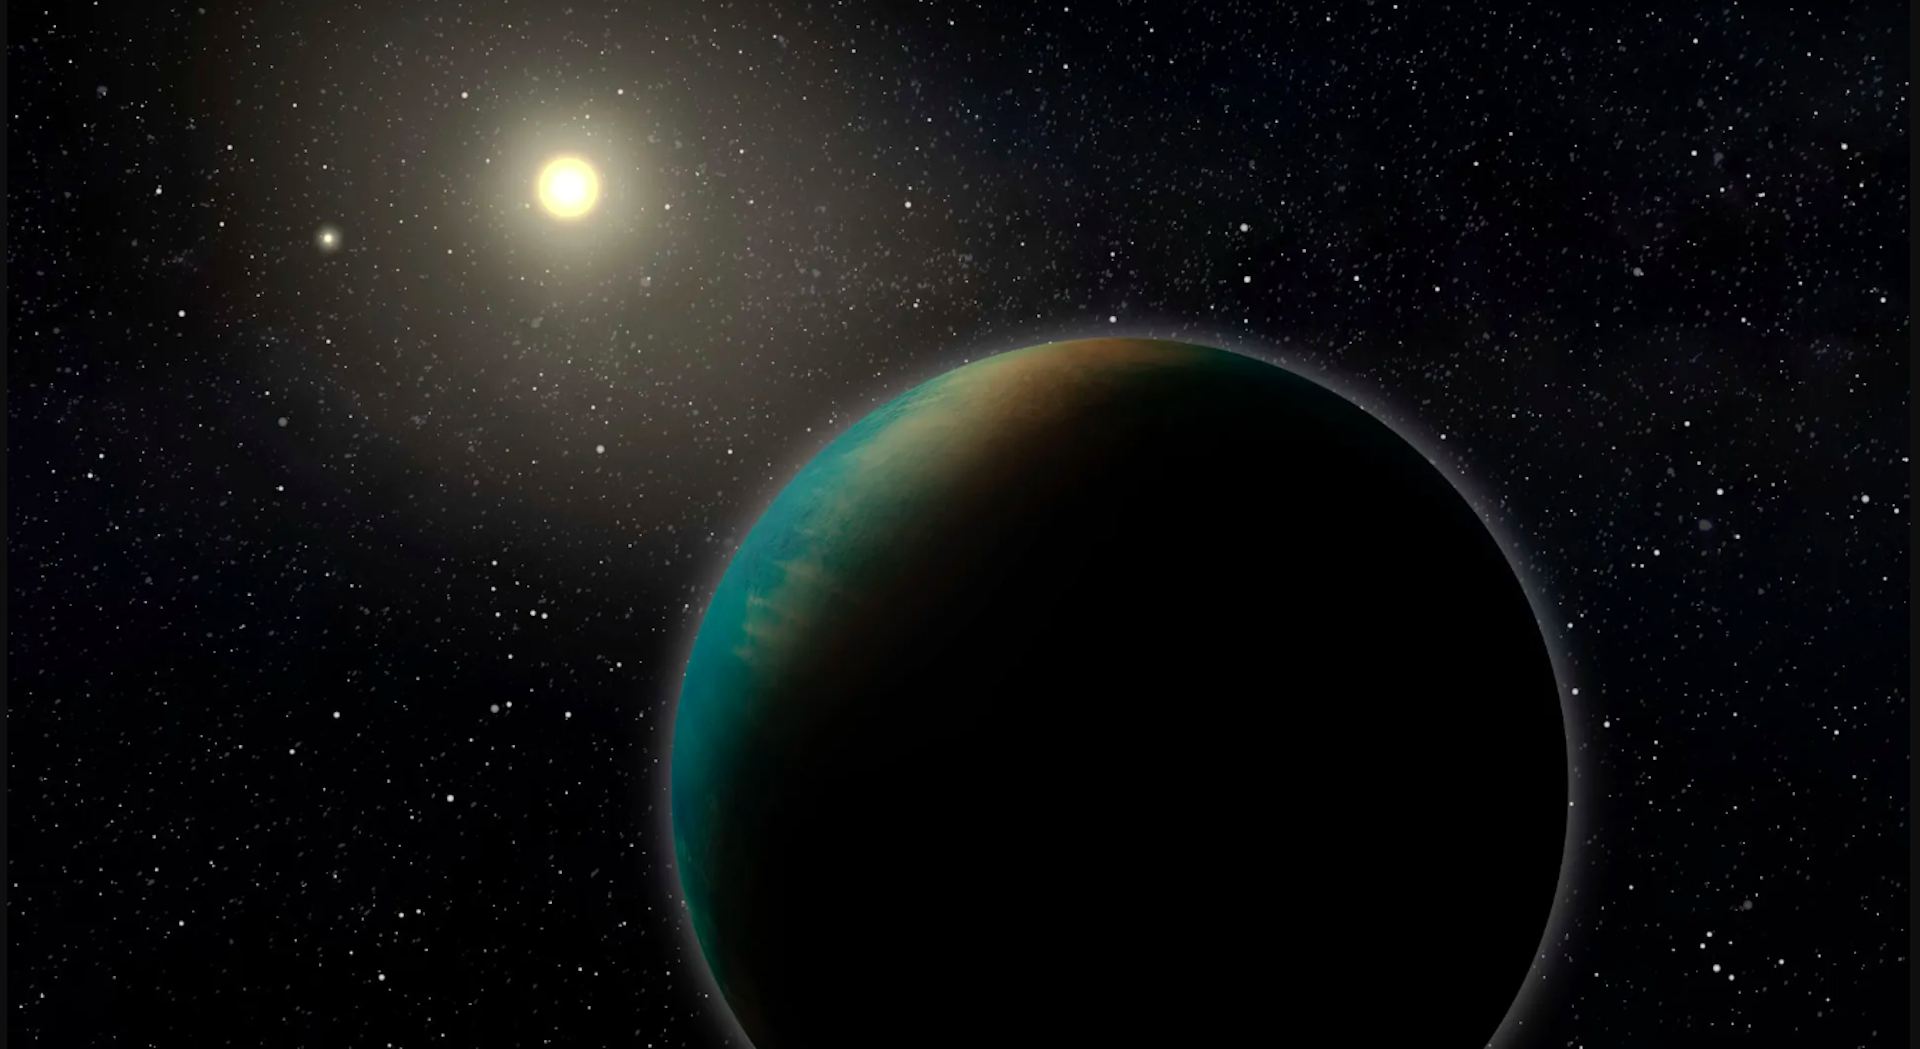 Astronomers have discovered billions of super-earths that are larger, more abundant, and more suitable for habitation than Earth.